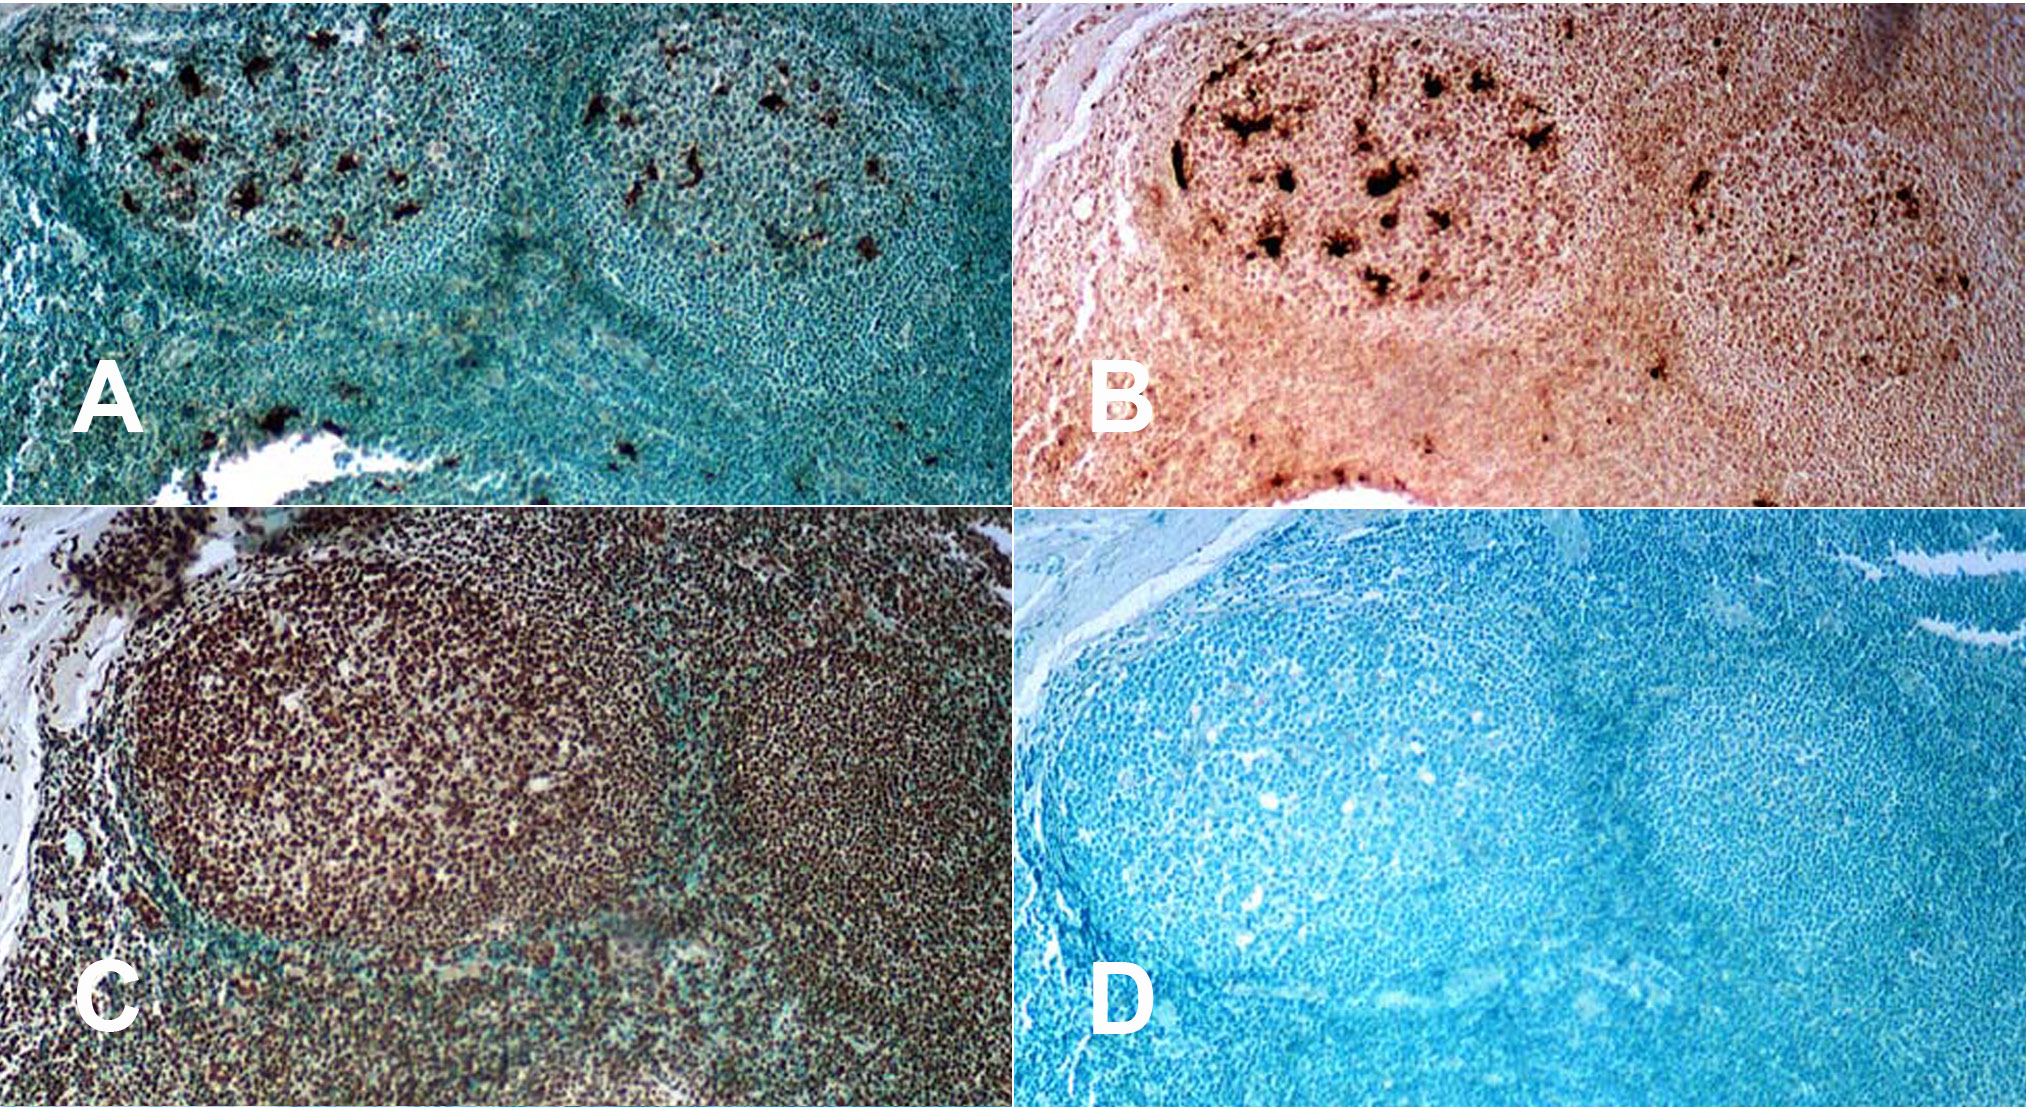 Figure 2. DNA Fragmentation Detection Kit (X2044K) using paraffin fixed human tonsil tissue, 10 μm sections (1000X). [A] Section processed and counter-stained with methyl green according to the DNA Fragmentation Detection Kit manual. [B] Counter-stain step was eliminated to more clearly illustrate the level of positive staining in the germinal centers of tonsil tissue. [C] Section treated with DNase I in order to generate a positive control slide. Note all nuclei stain positive. The use of DNase I generates free 3’-OH groups on cellular DNA, these free 3’-OH groups are then labeled with biotin-nucleotide by the TdT in the DNA Fragmentation Detection Kit (X2044K). [D] Negative control, where the TdT enzyme step was eliminated, thereby generating a negative slide.